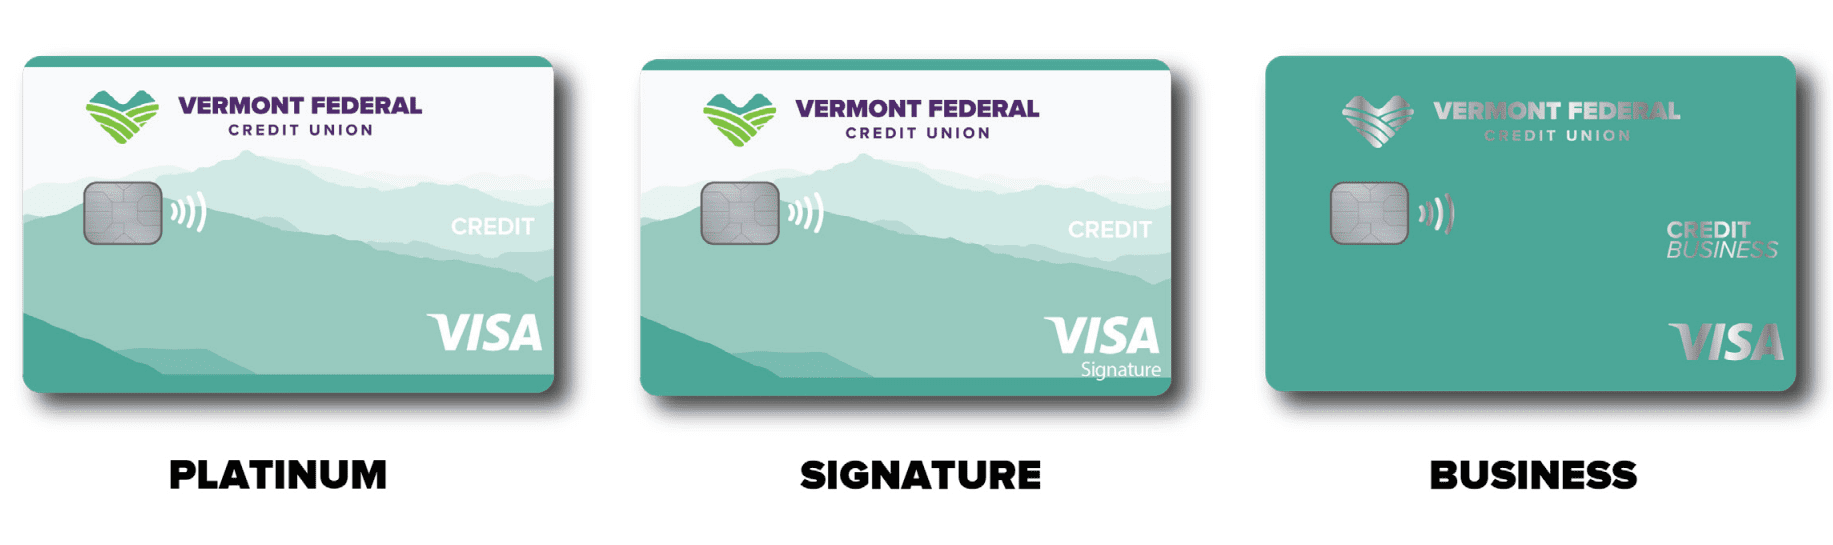 Vermont Federal Credit Union credit card suite